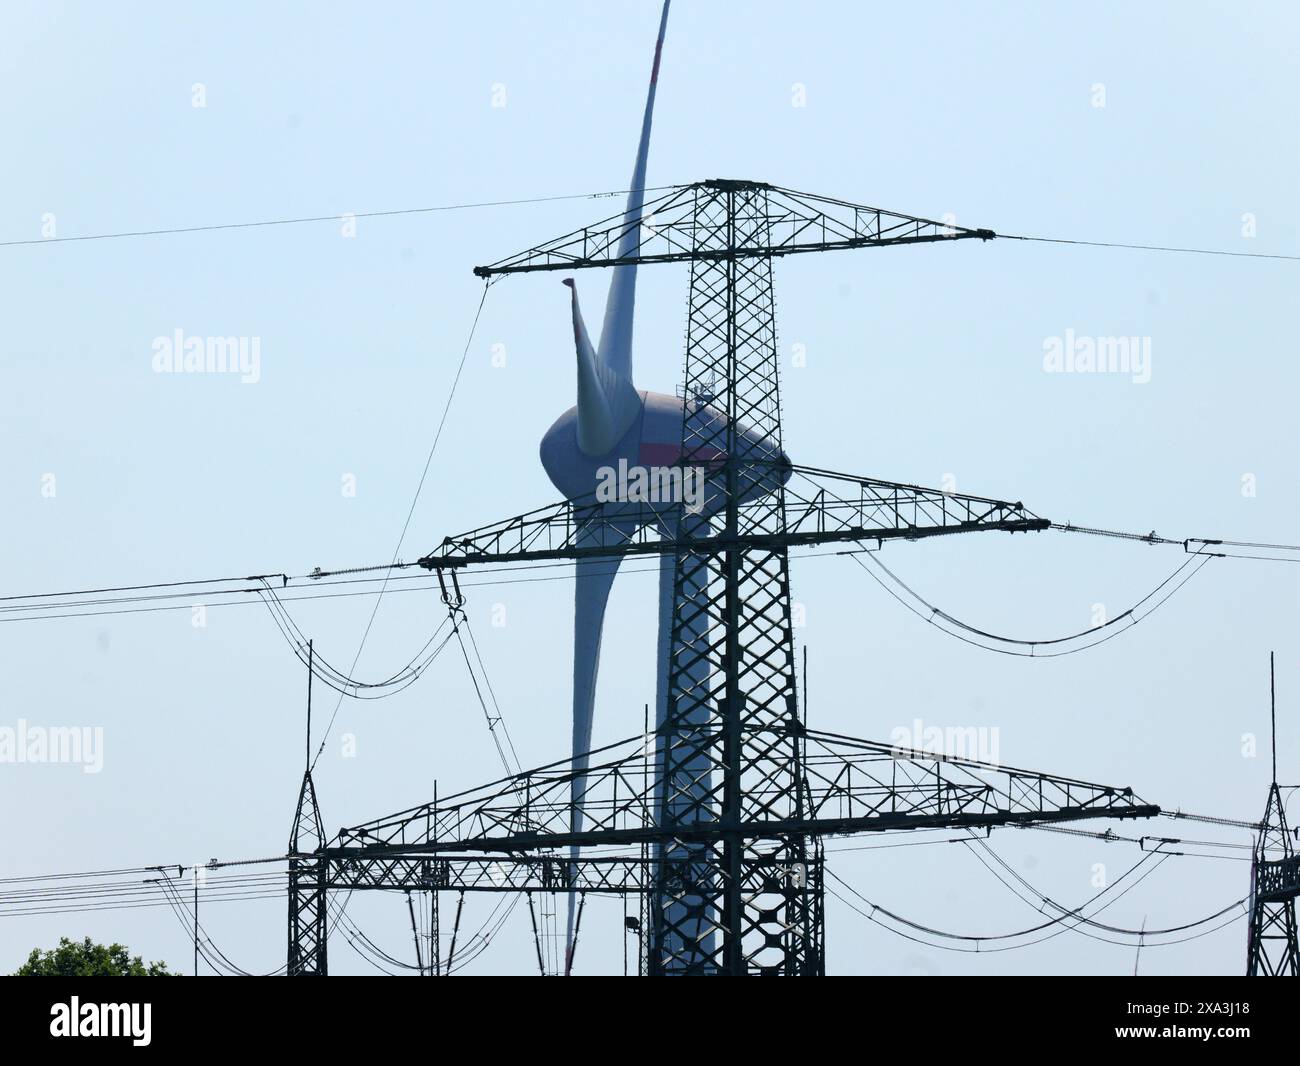 A photo of a wind turbine and a high voltage mast symbolizes sustainable energy generation and the transition to renewable energy sources. Stock Photo